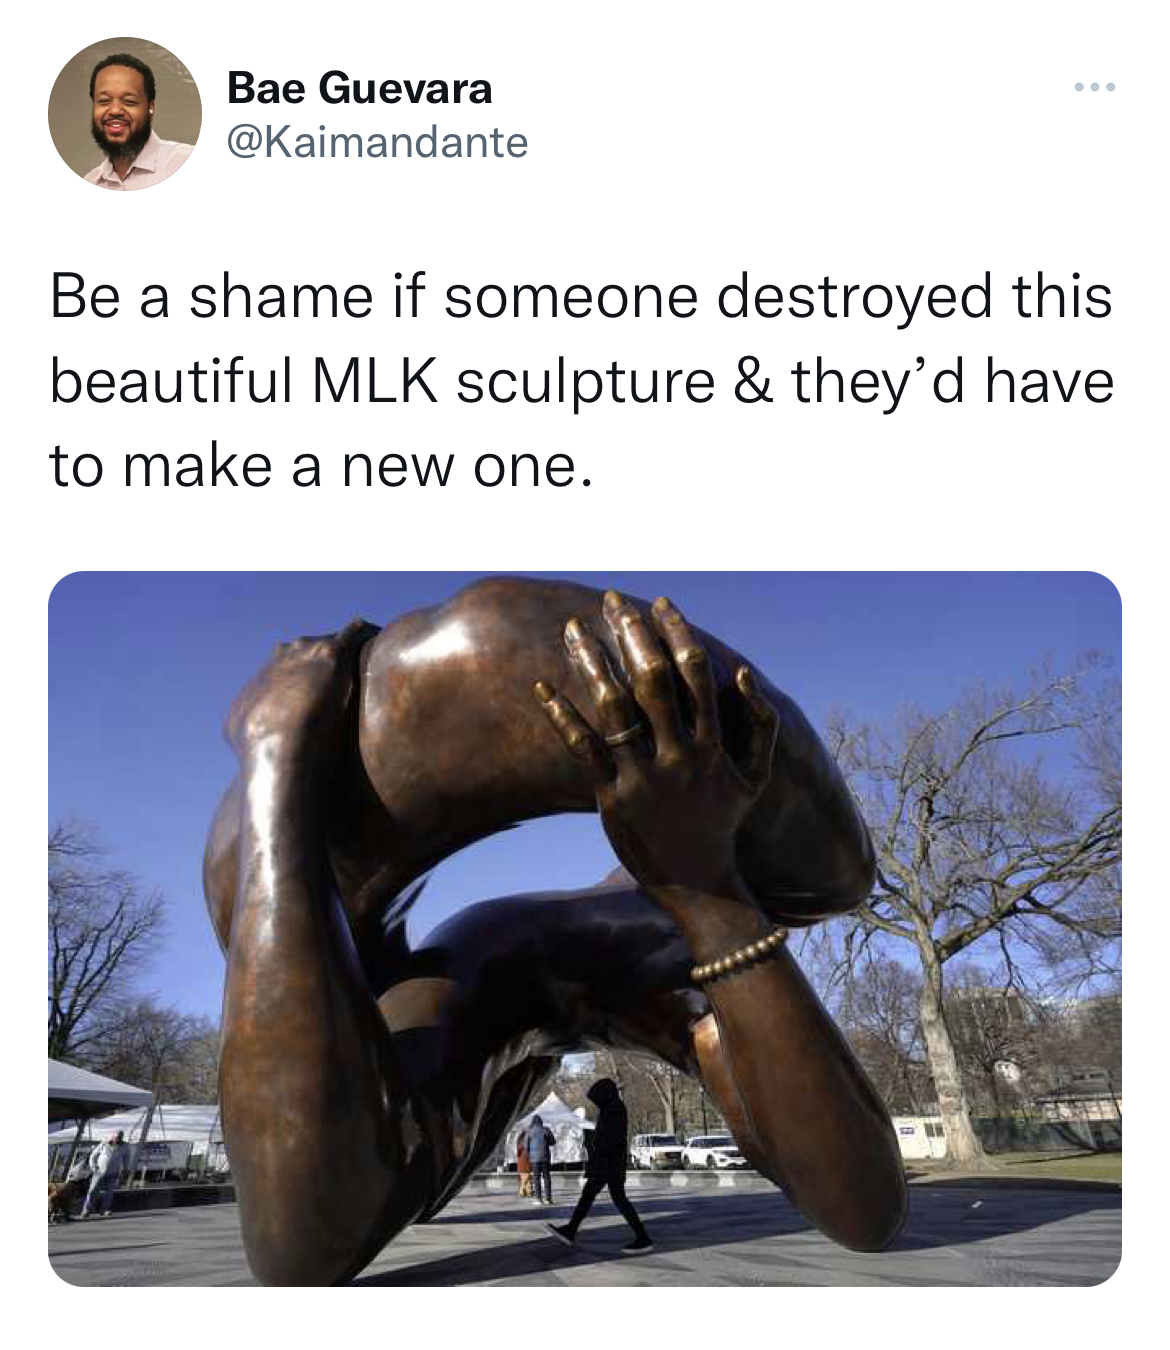 MLK Jr. Sculpture memes - Martin Luther King Jr. - Bae Guevara Be a shame if someone destroyed this beautiful Mlk sculpture & they'd have to make a new one.